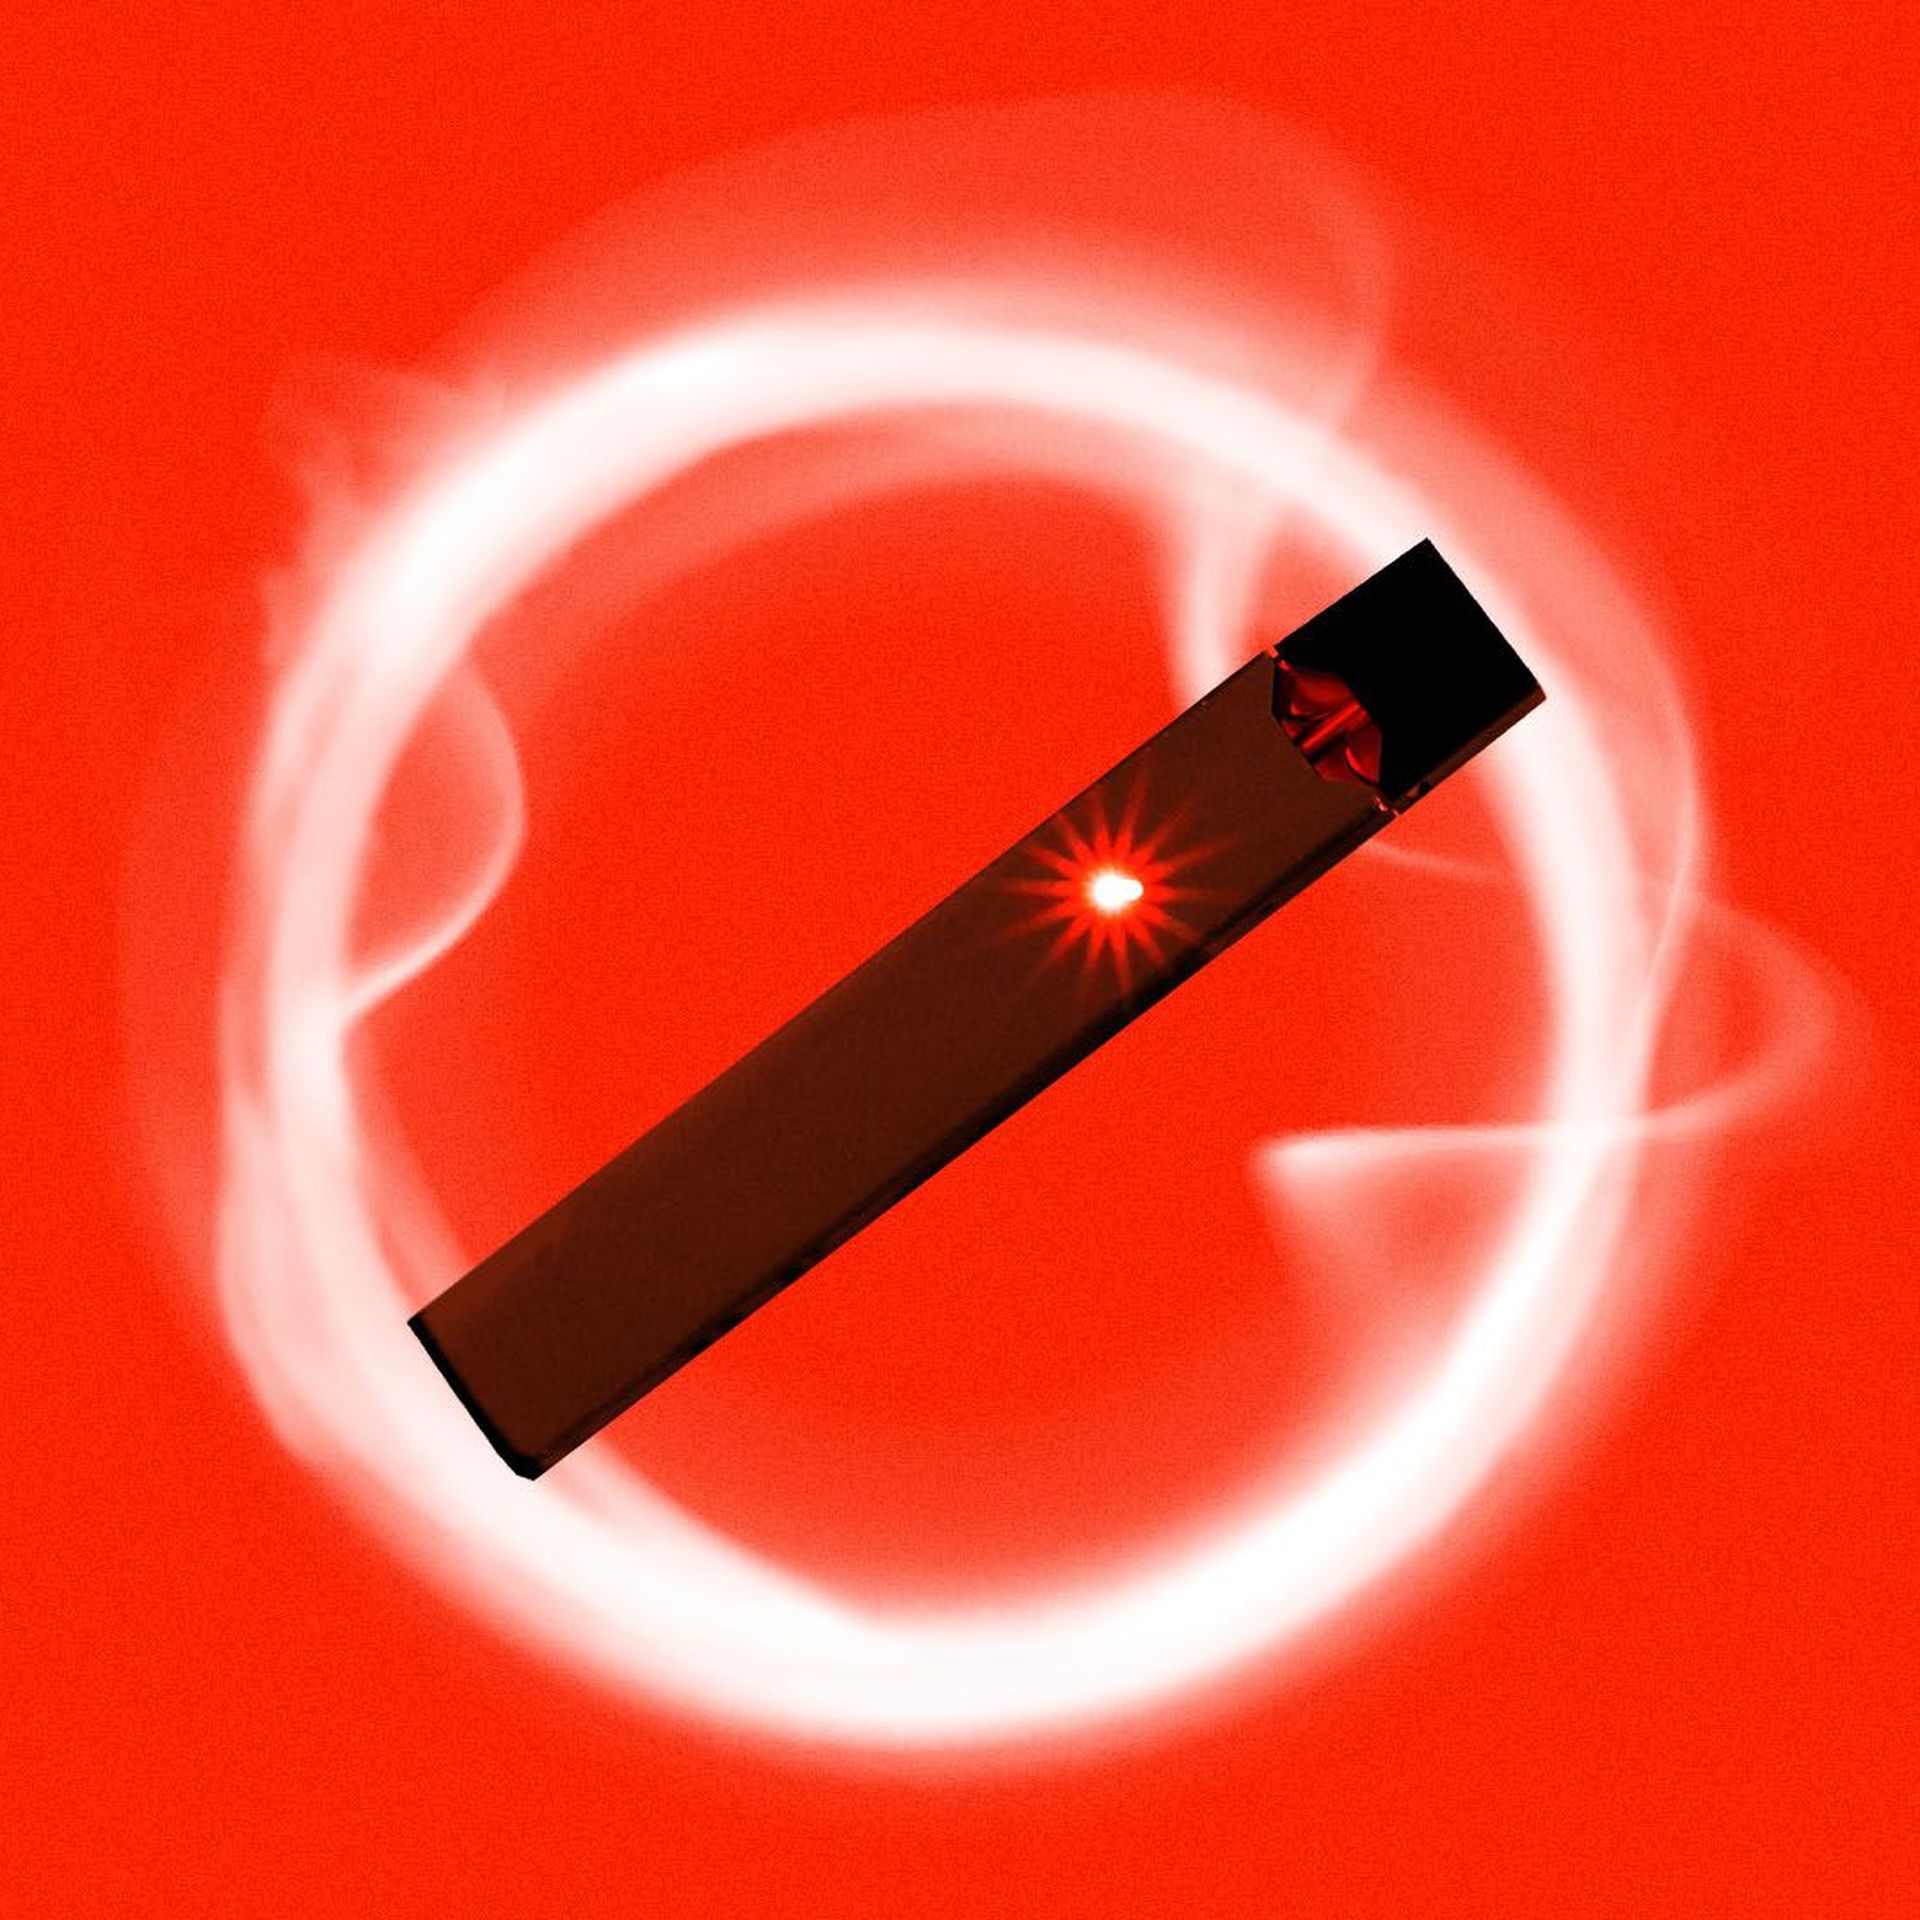 Illustration of a juul device forming a "no" symbol with a cloud of vapor around it